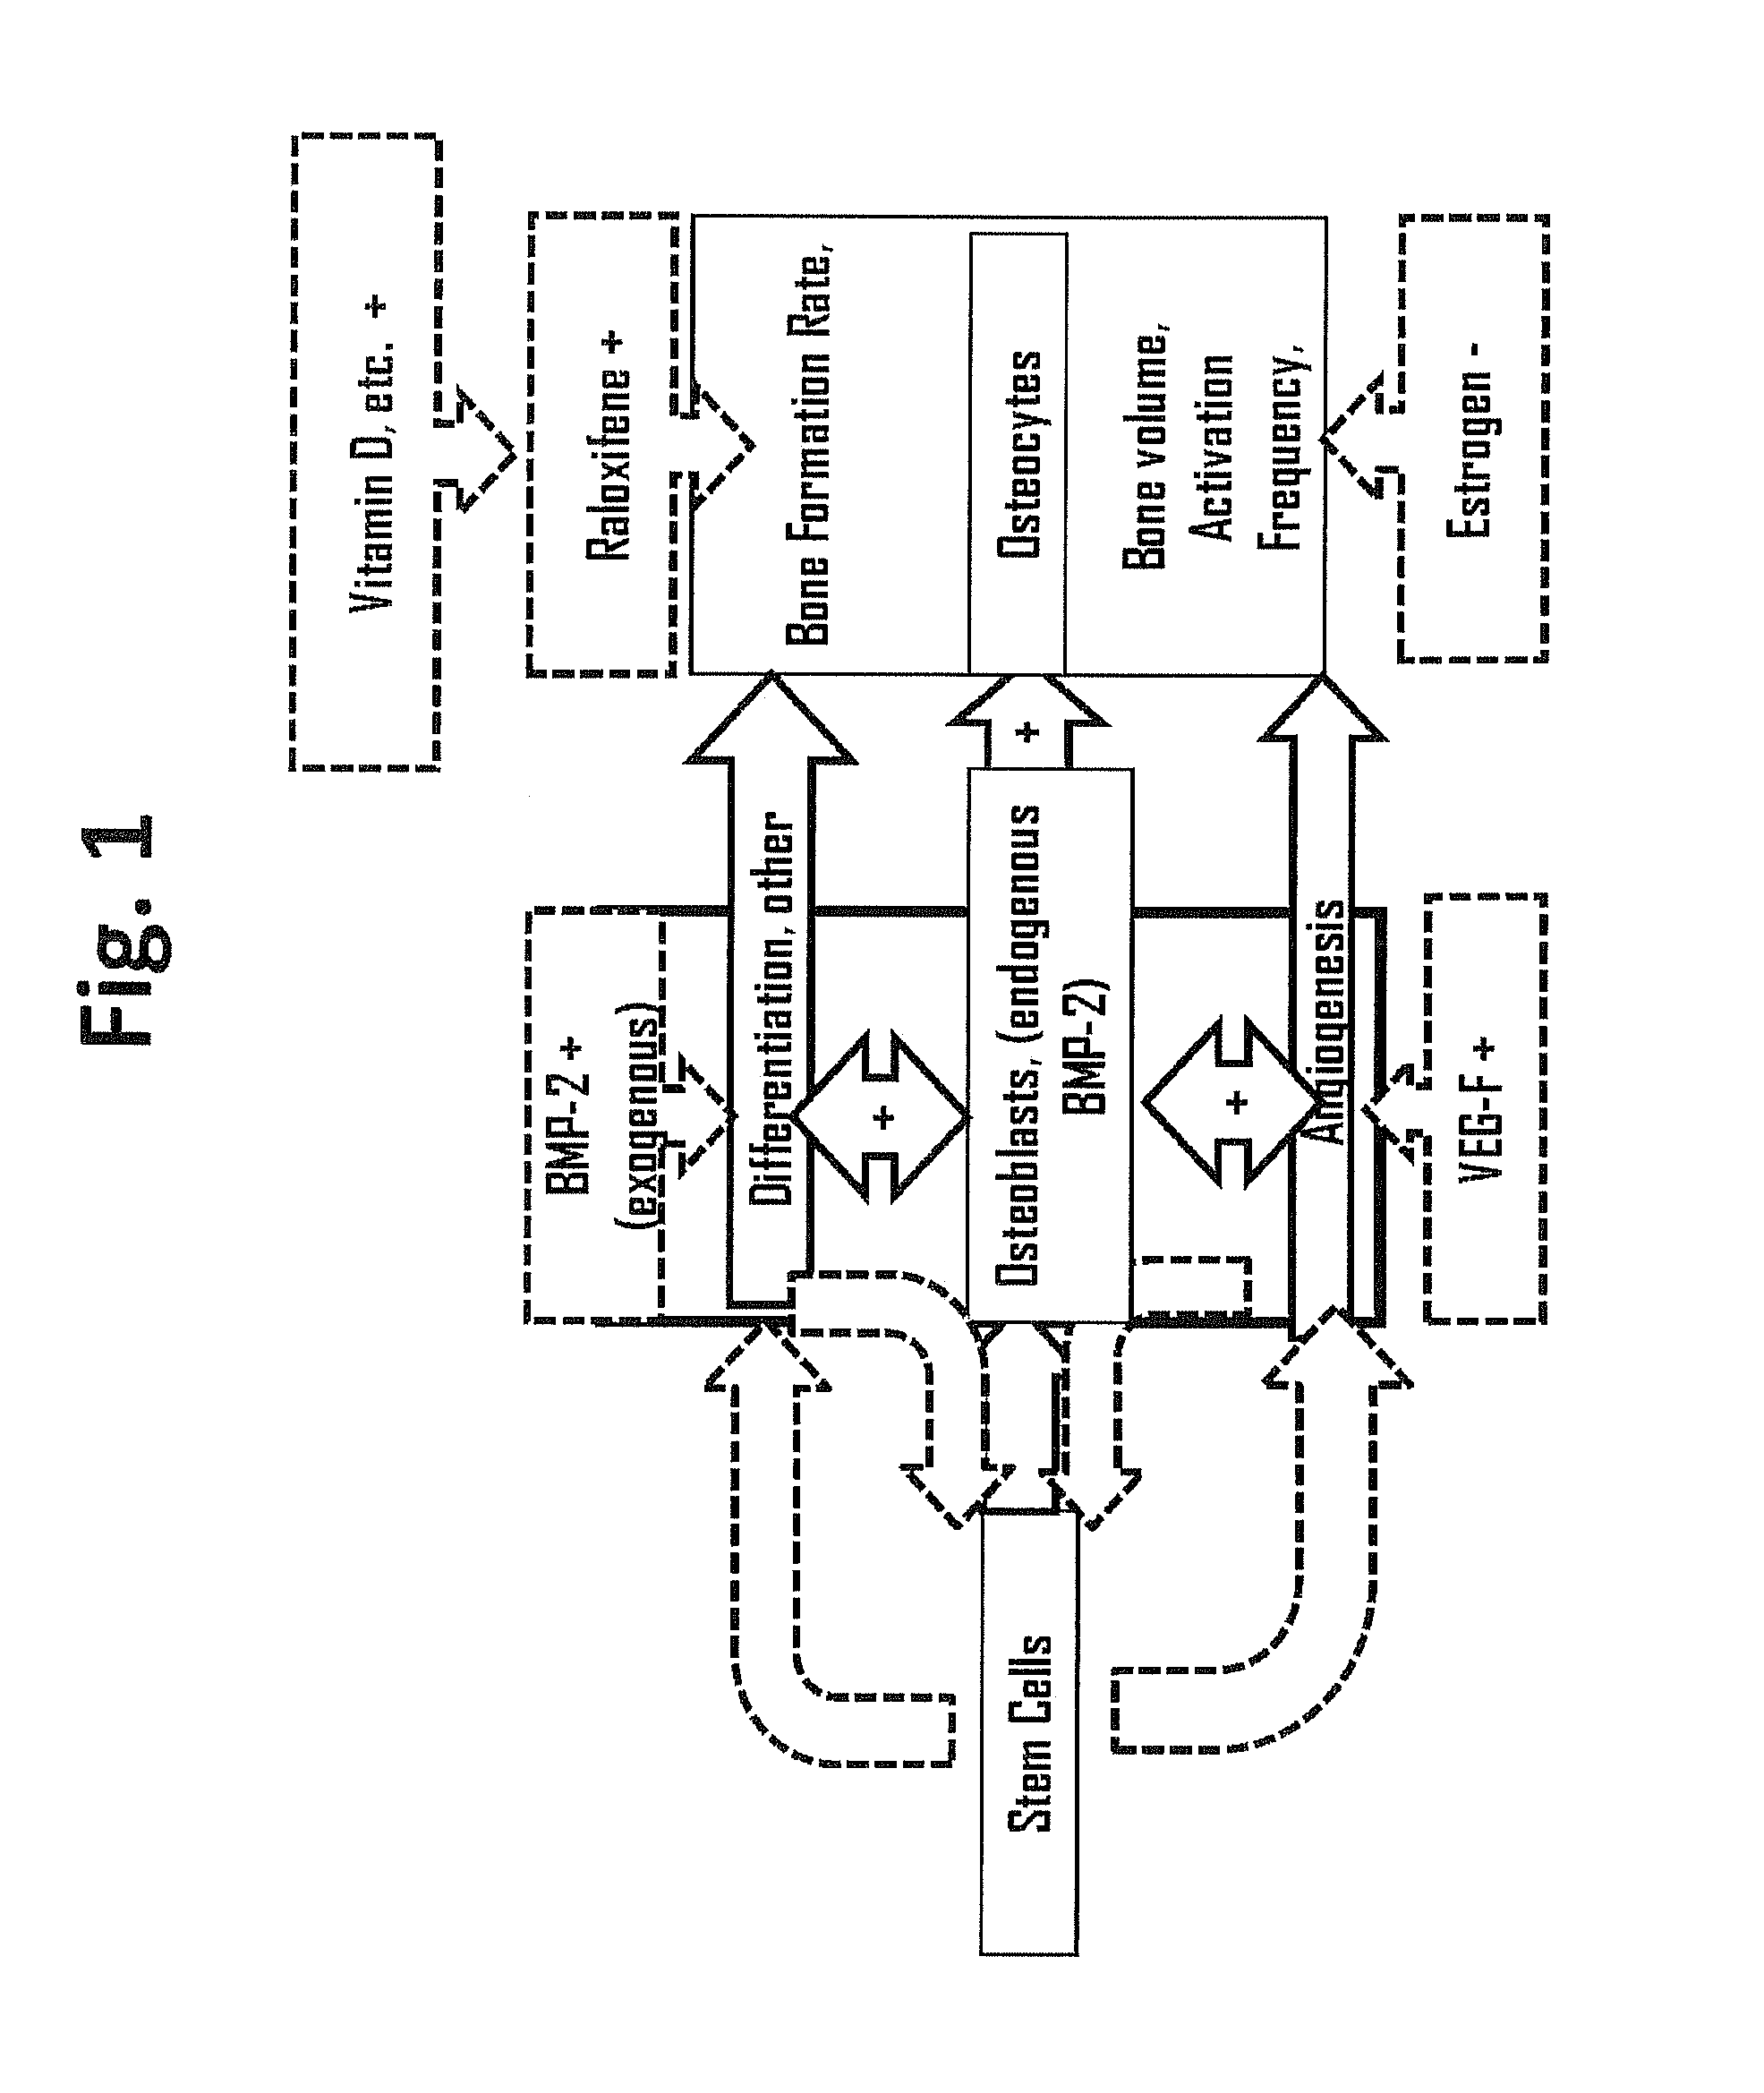 Use of selective estrogen receptor modulator for joint fusion and other repair or healing of connective tissue